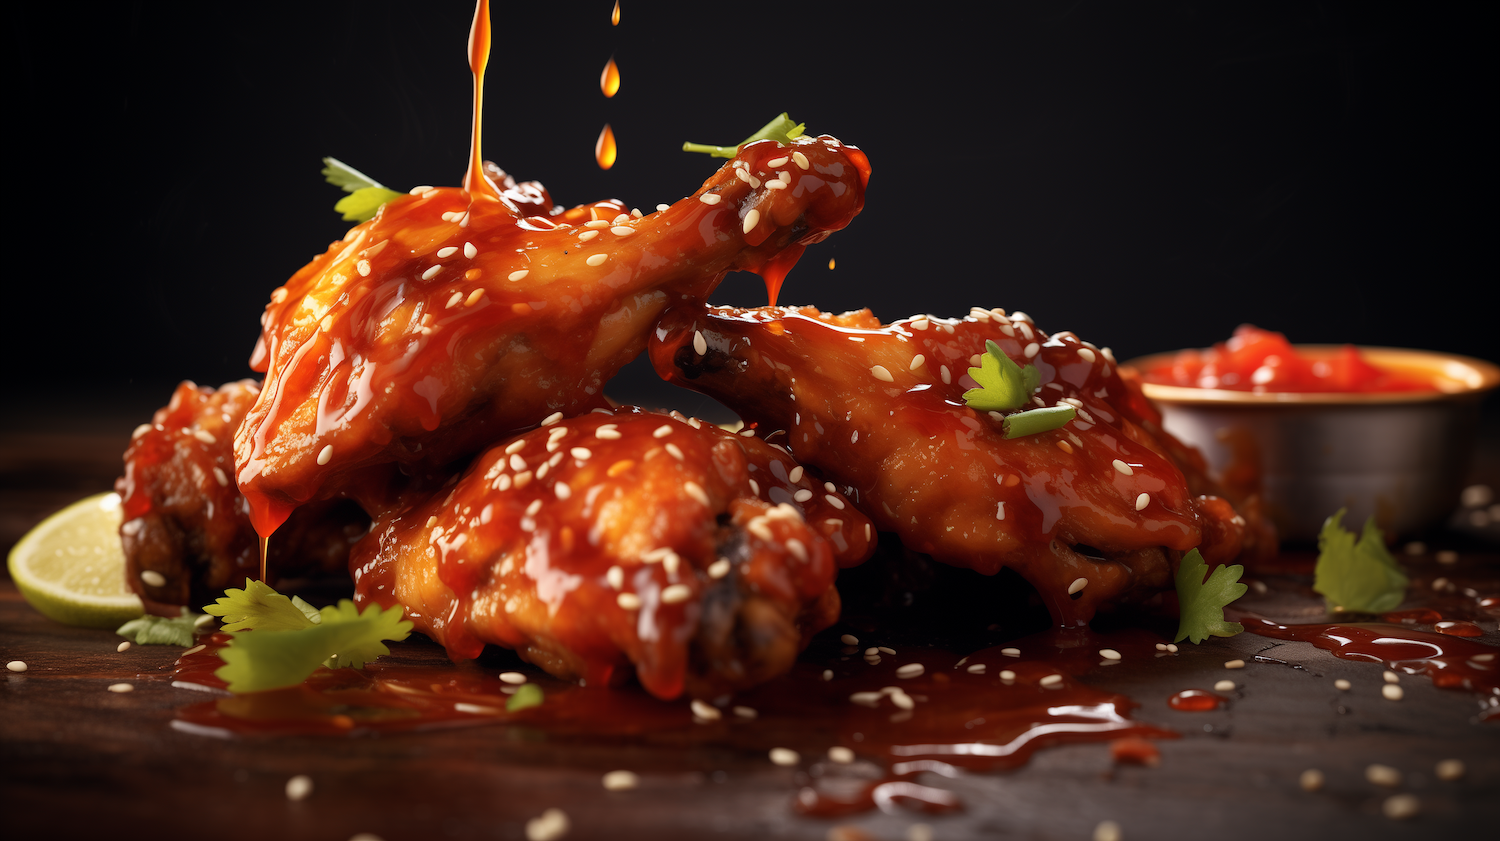 Image of oven-baked chicken wings with hot honey sriracha sauce.